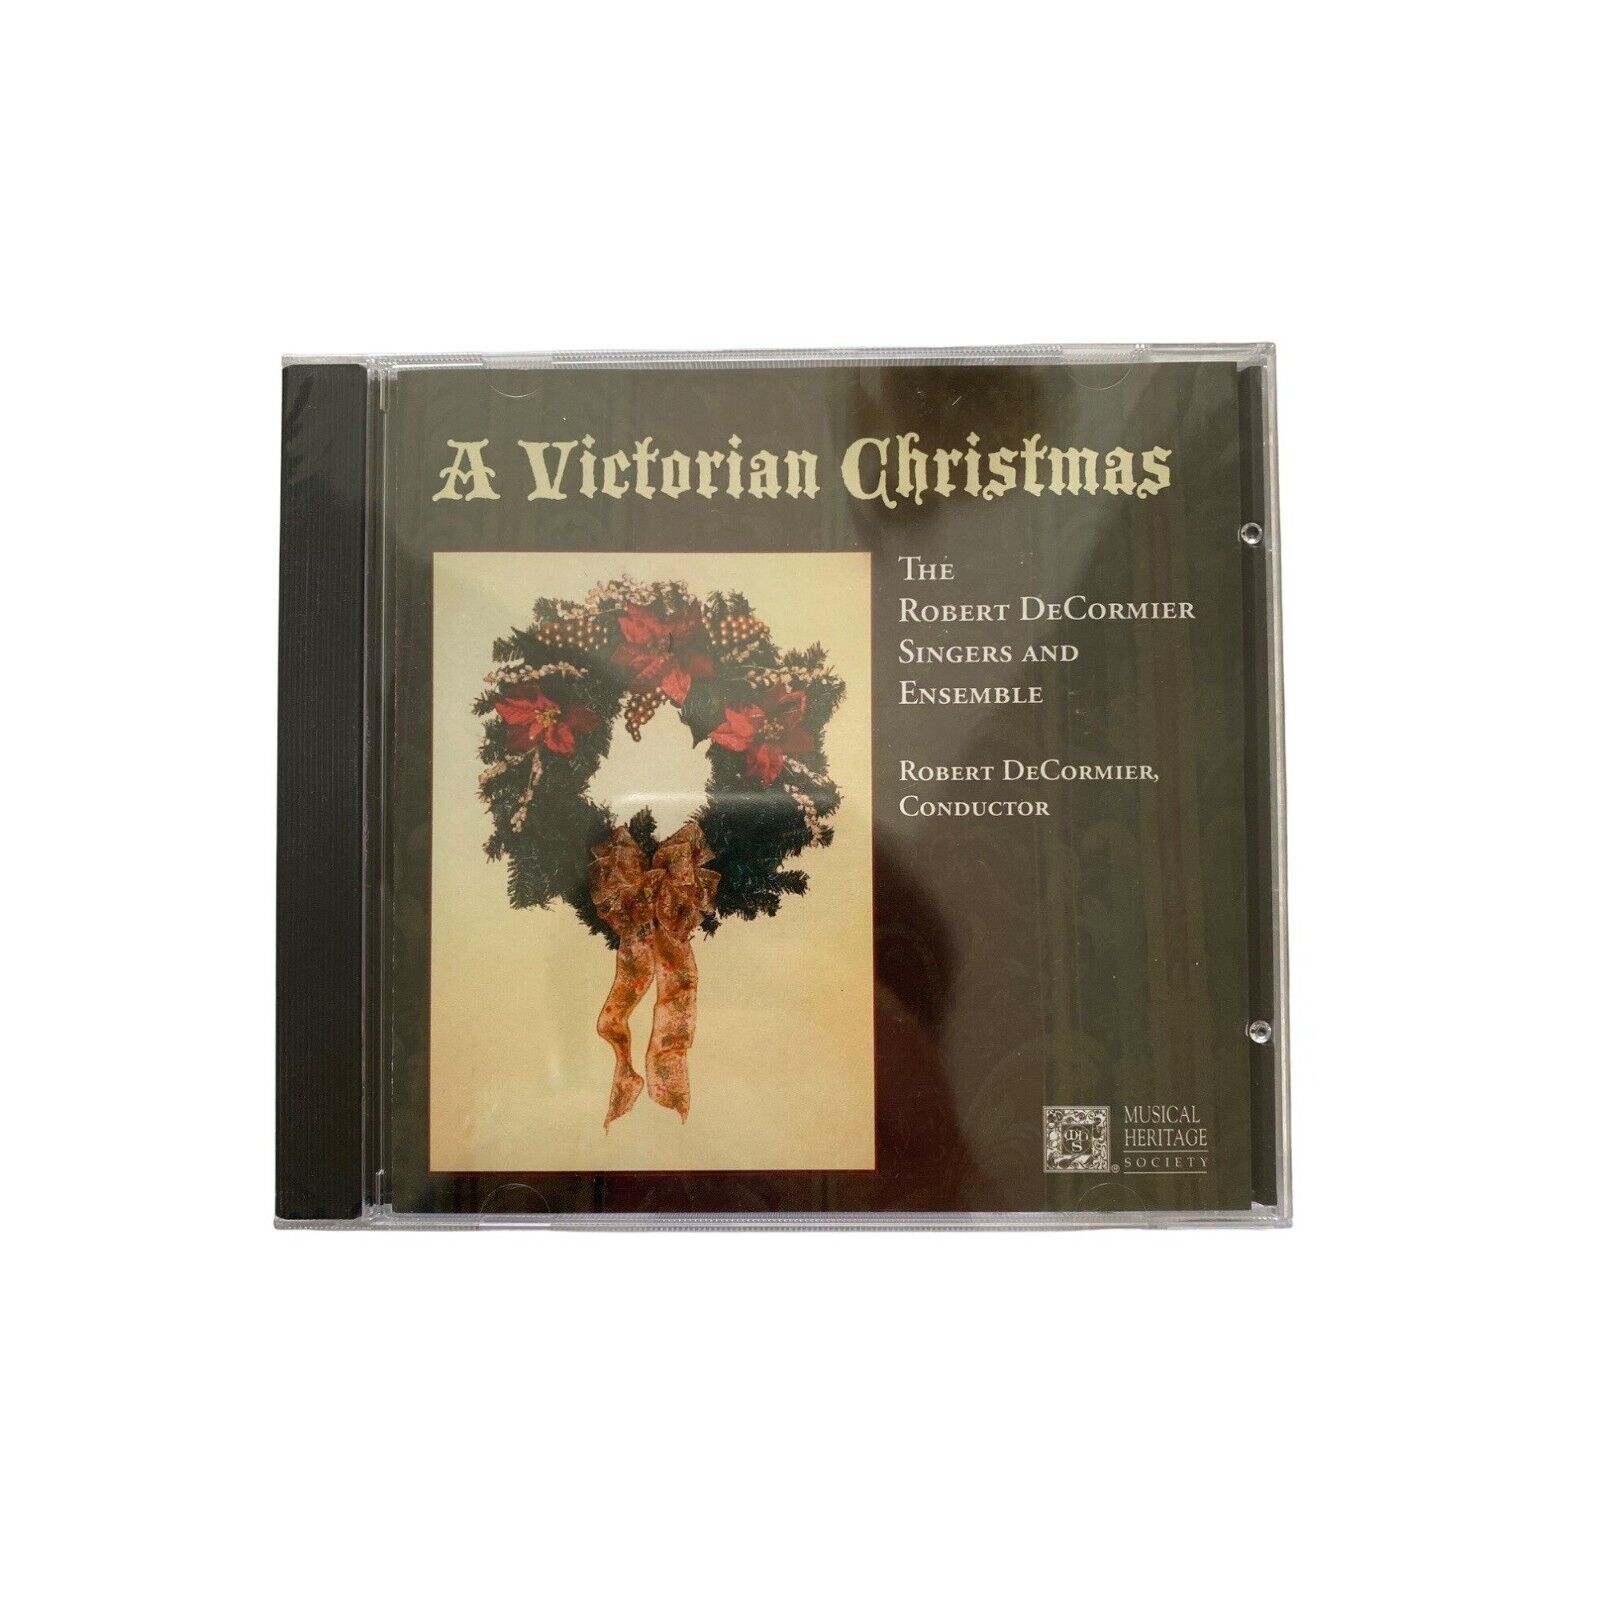 Vintage A Victorian Christmas Holiday Audio CD Robert DeCormier Singers